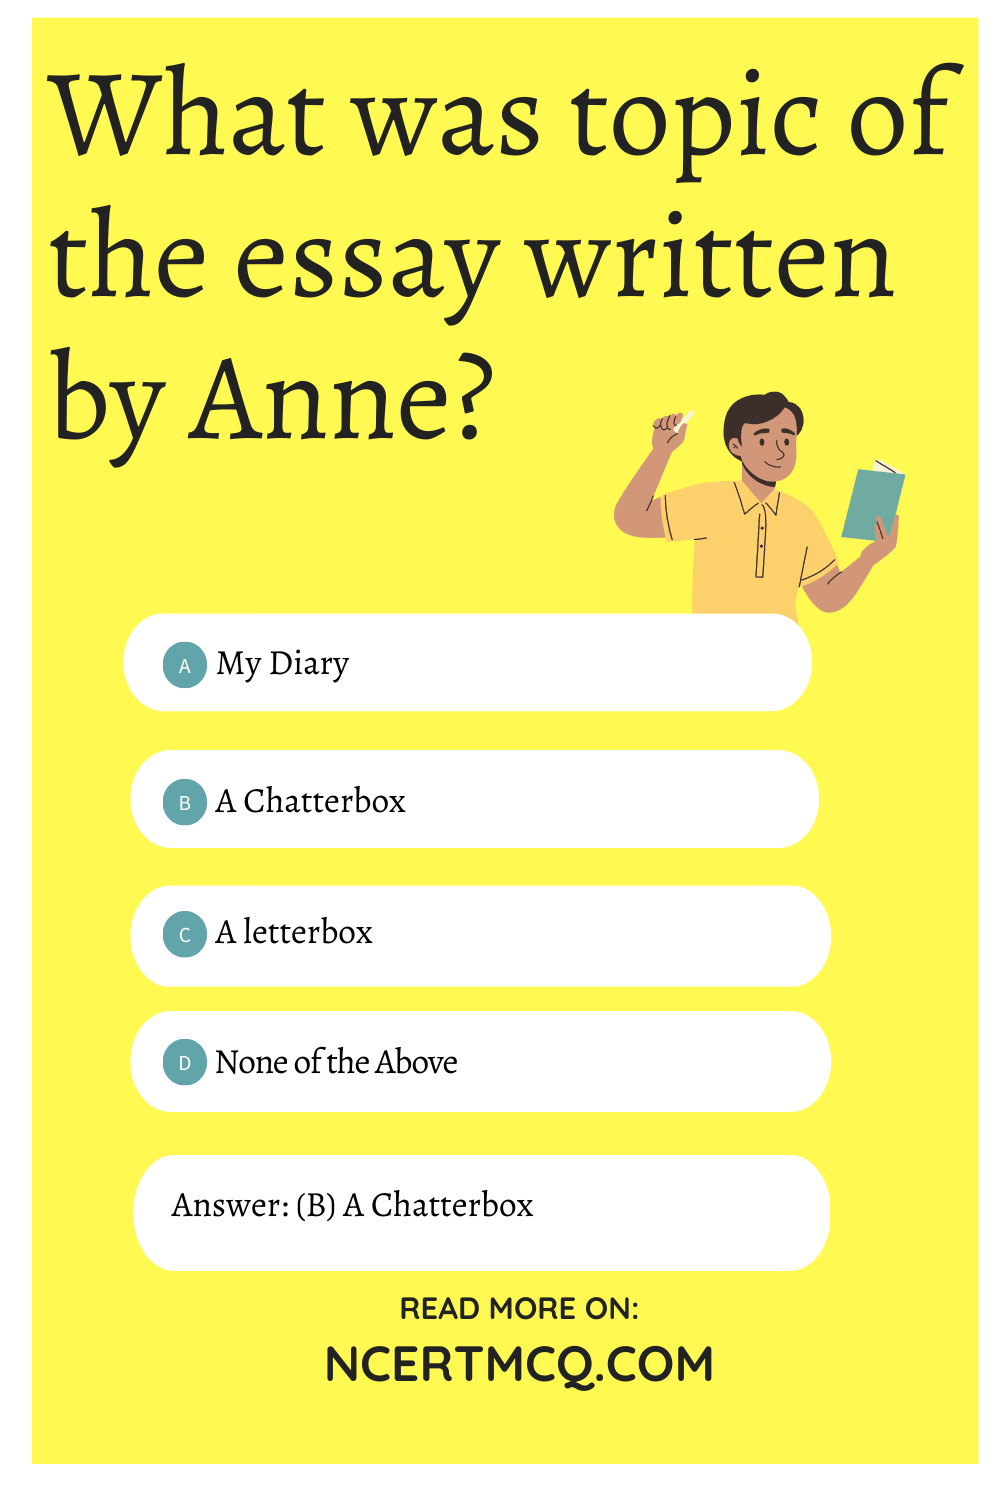 What was topic of the essay written by Anne?